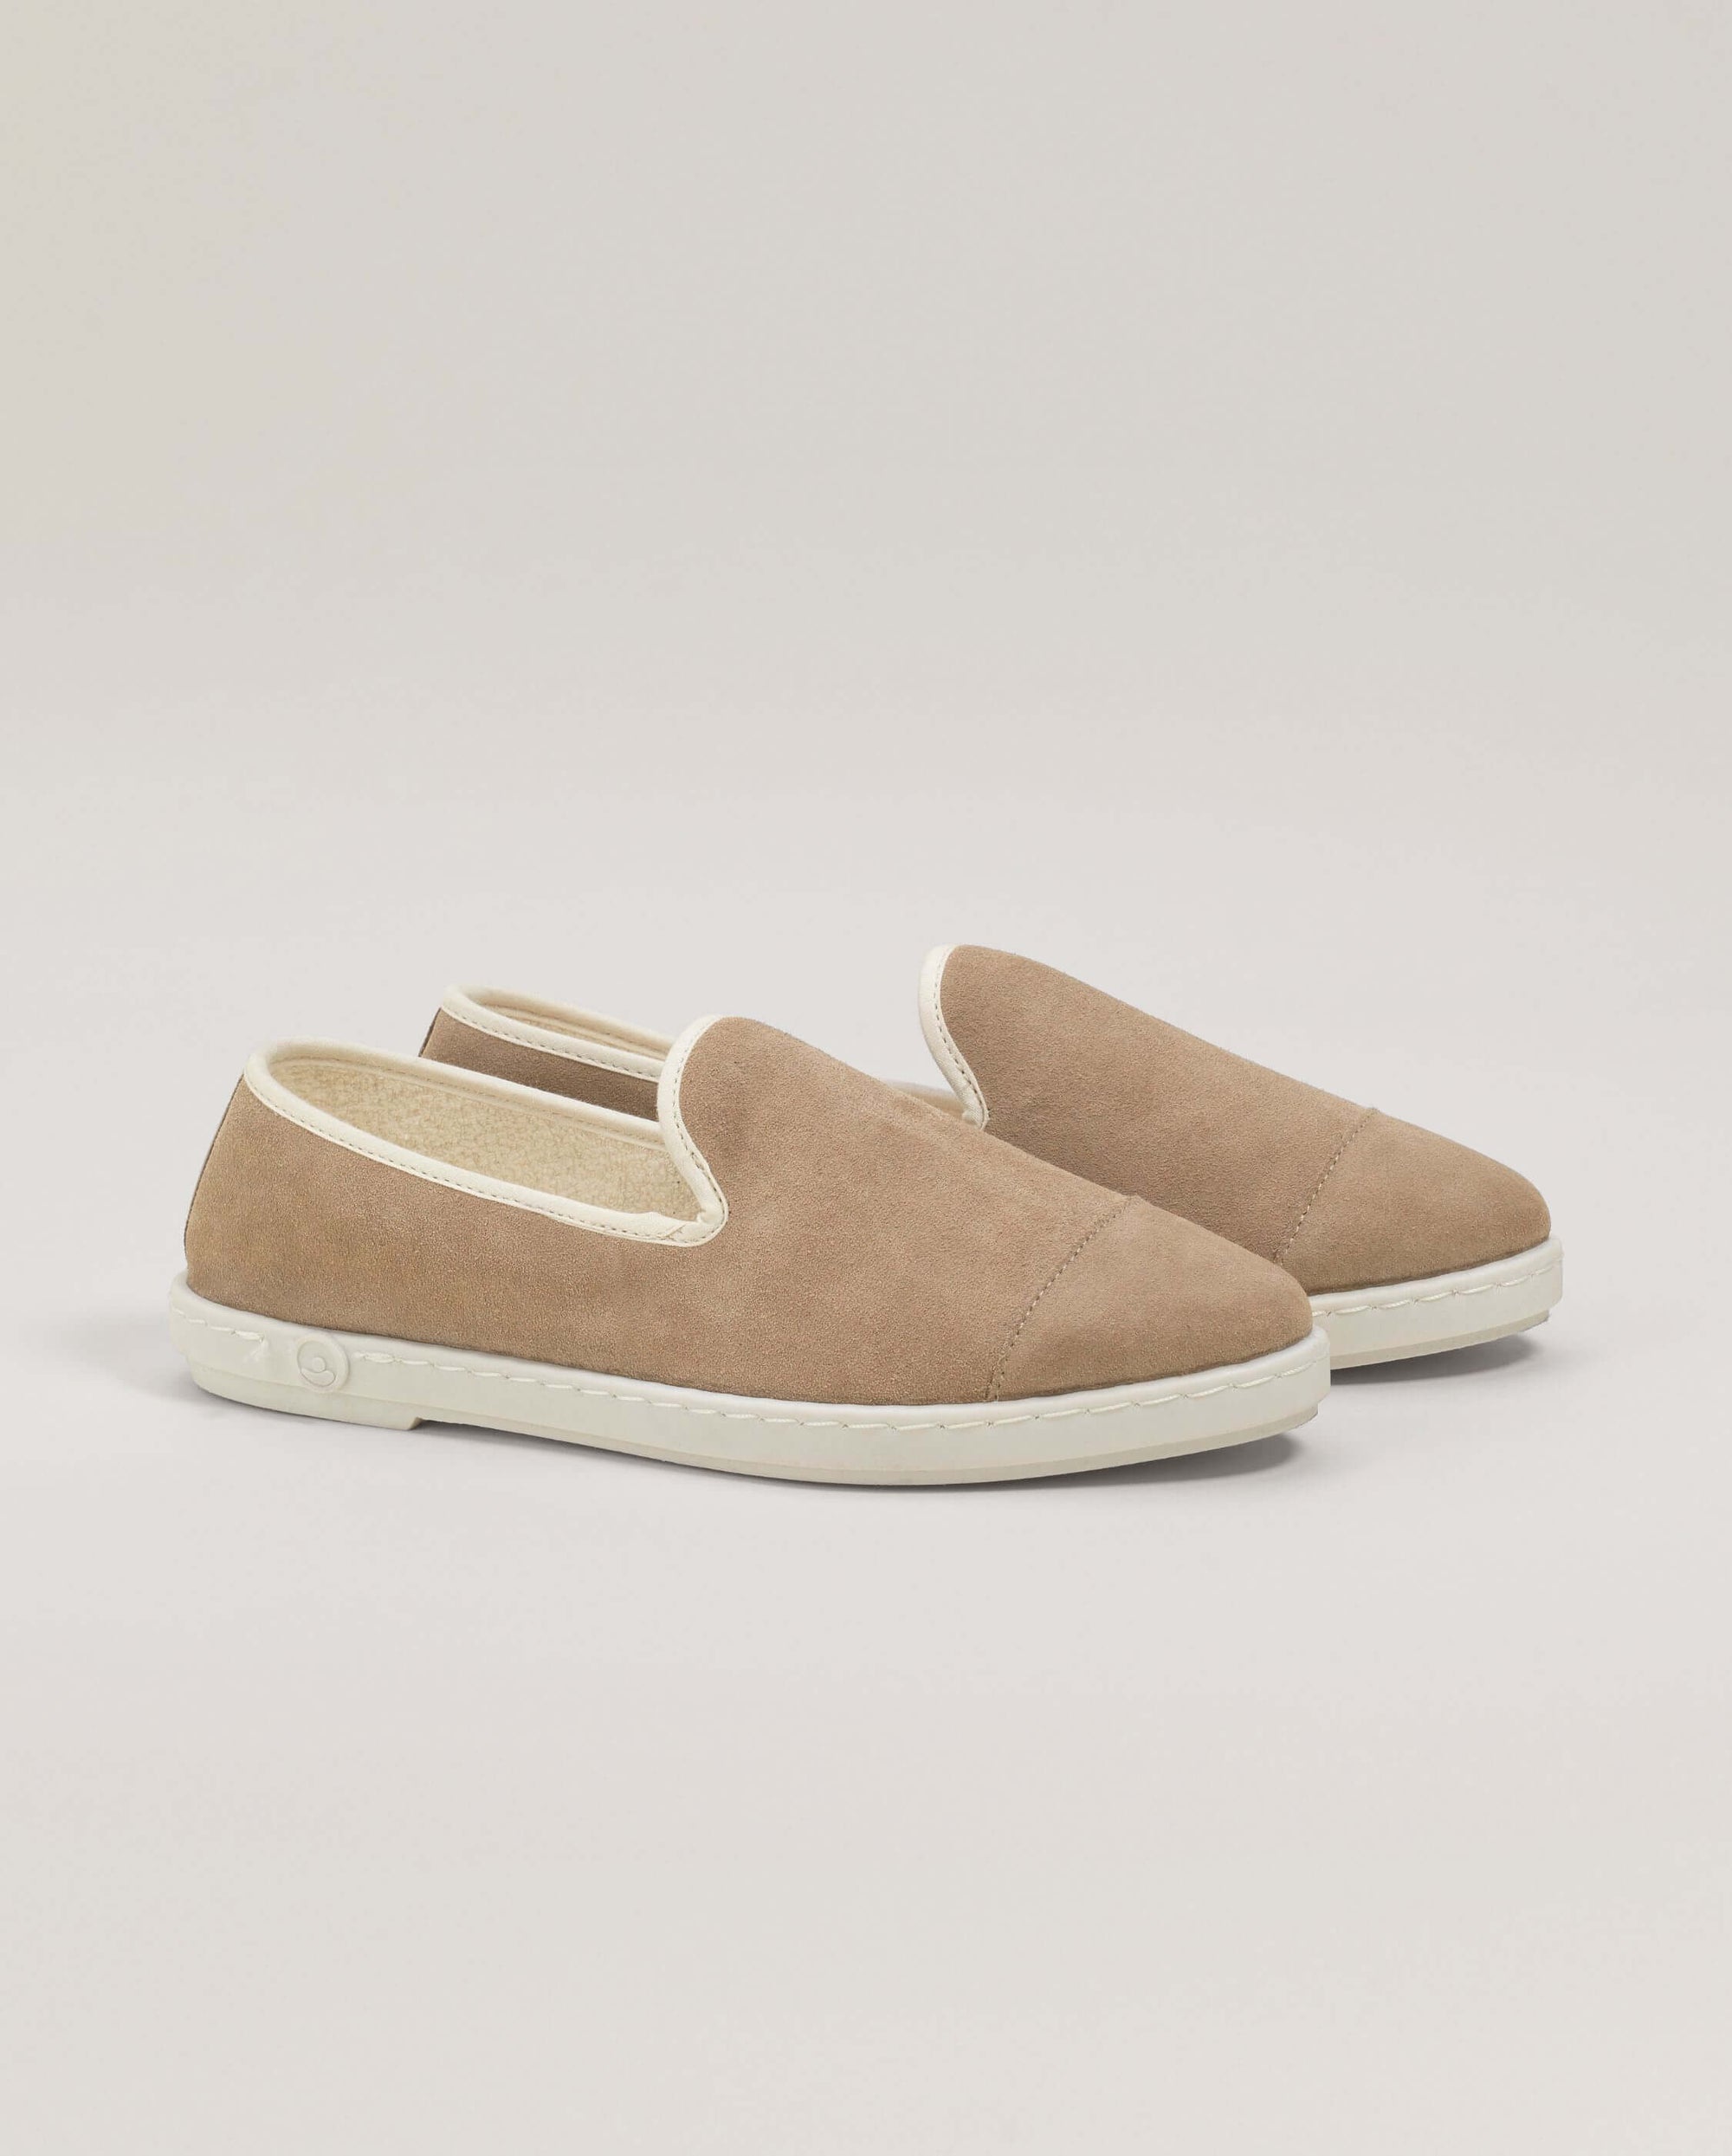 Chausson femme cuir, taupe